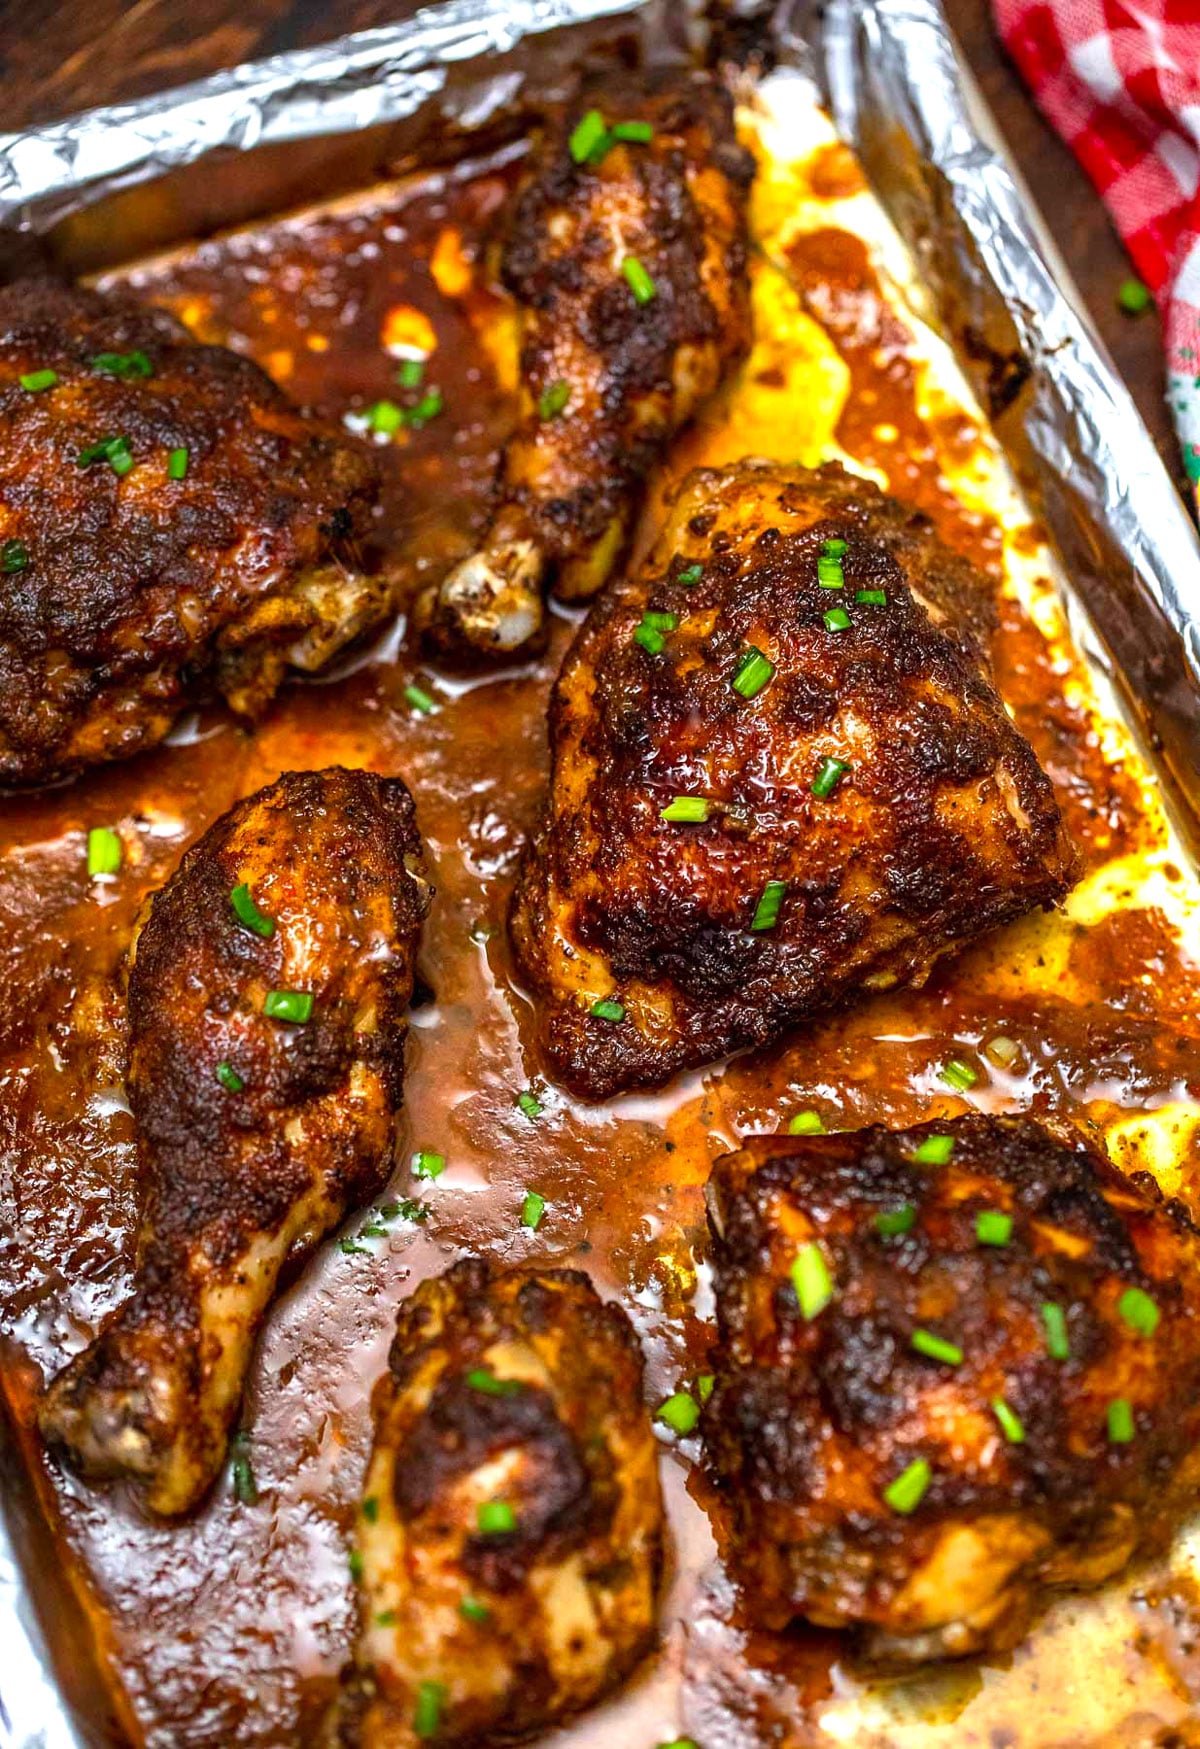 Jerk Chicken Recipe [Video] - Sweet and Savory Meals